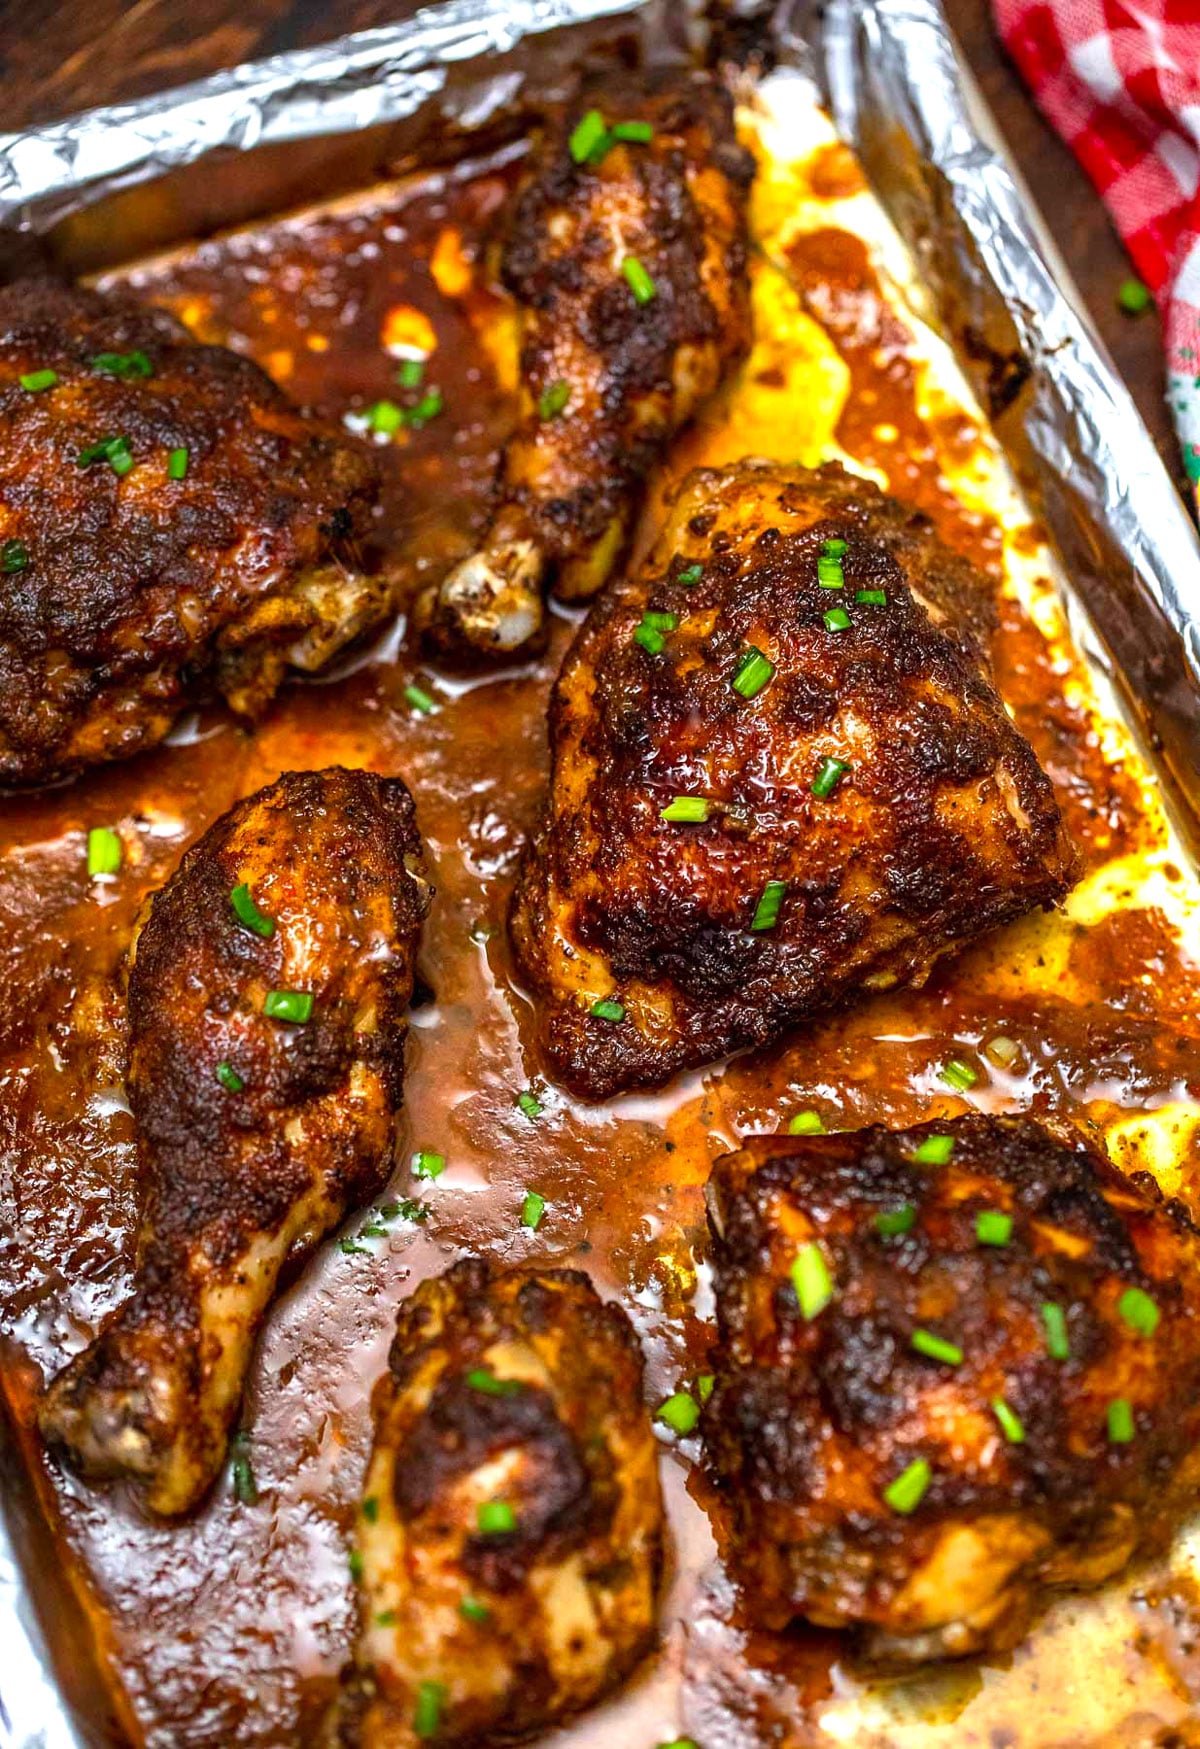 Jerk Chicken Recipe [Video] - Sweet and Savory Meals